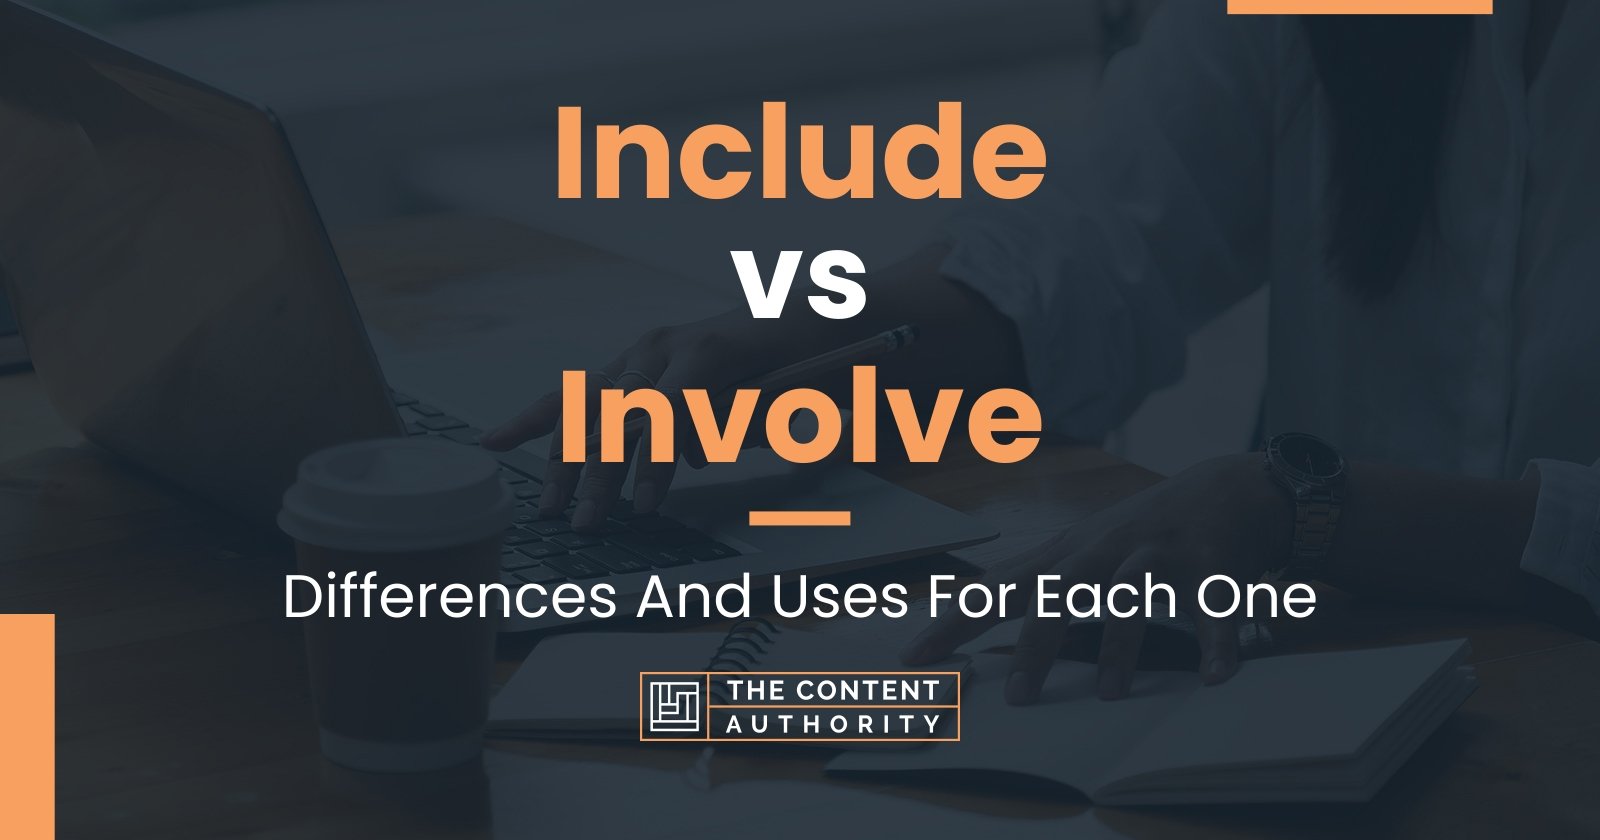 Include vs Involve: Differences And Uses For Each One